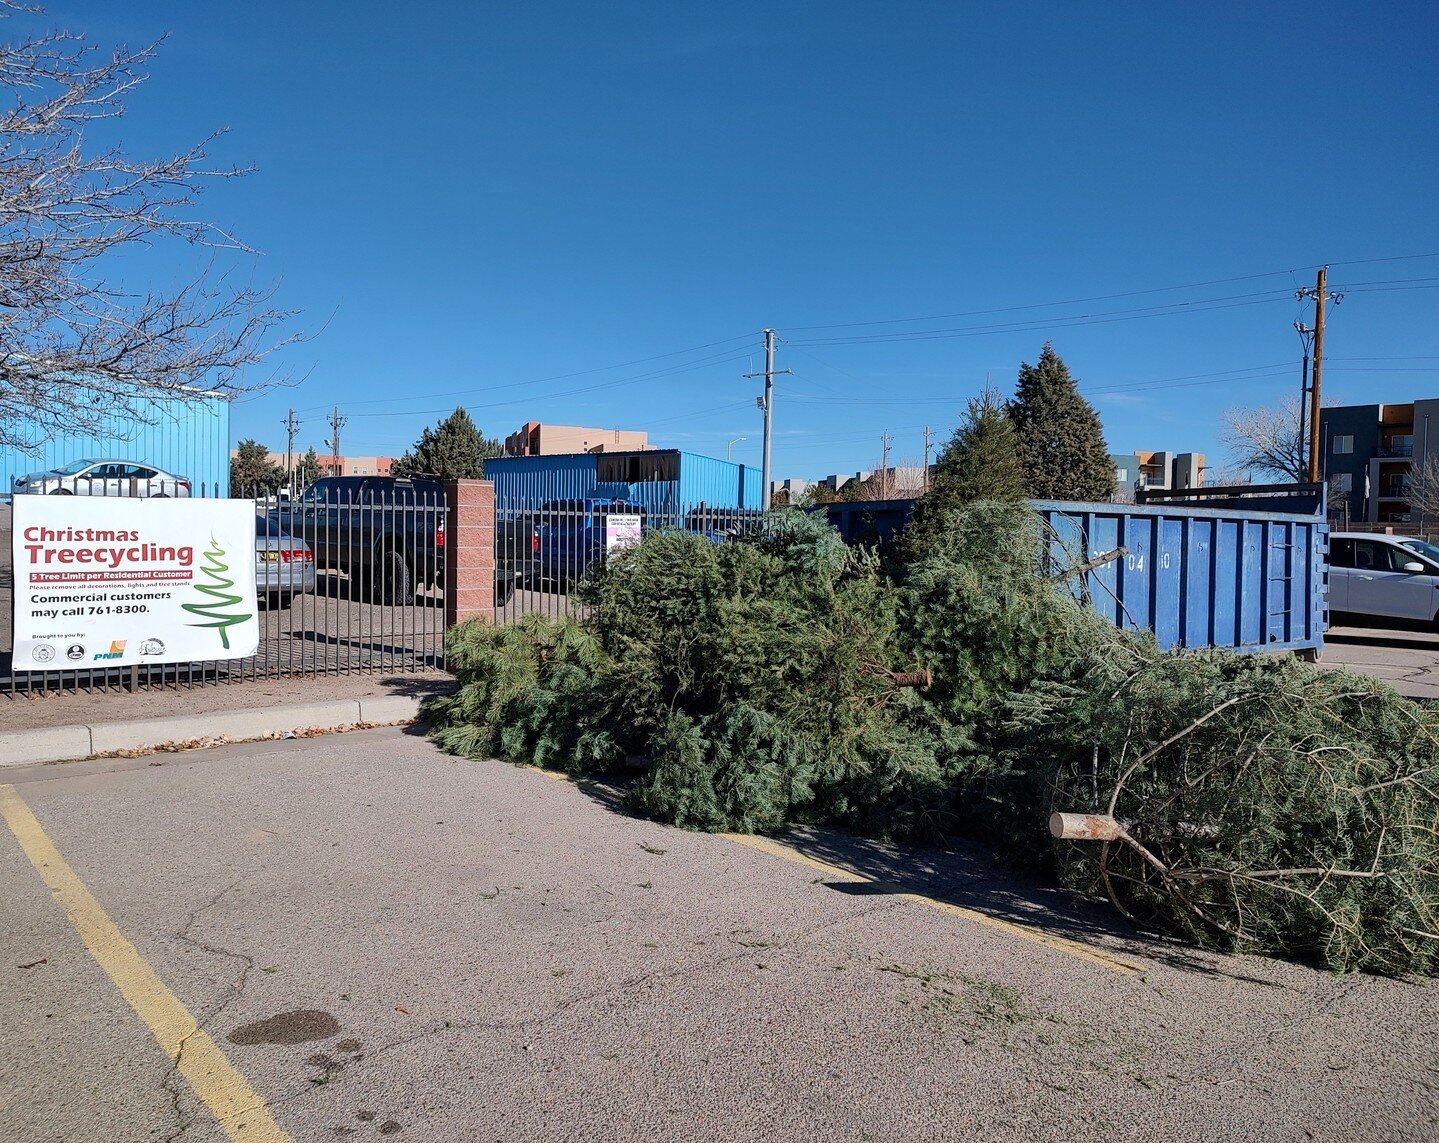 Our treecycling efforts have paid off! Together, we've saved 4,889 trees from the landfill and turned them into 59 cubic yards of mulch. A big thank you to all who joined us in recycling their trees this year! 🌳♻️
.
.
.
 #OneAlbuquerque #KeepABQBeau